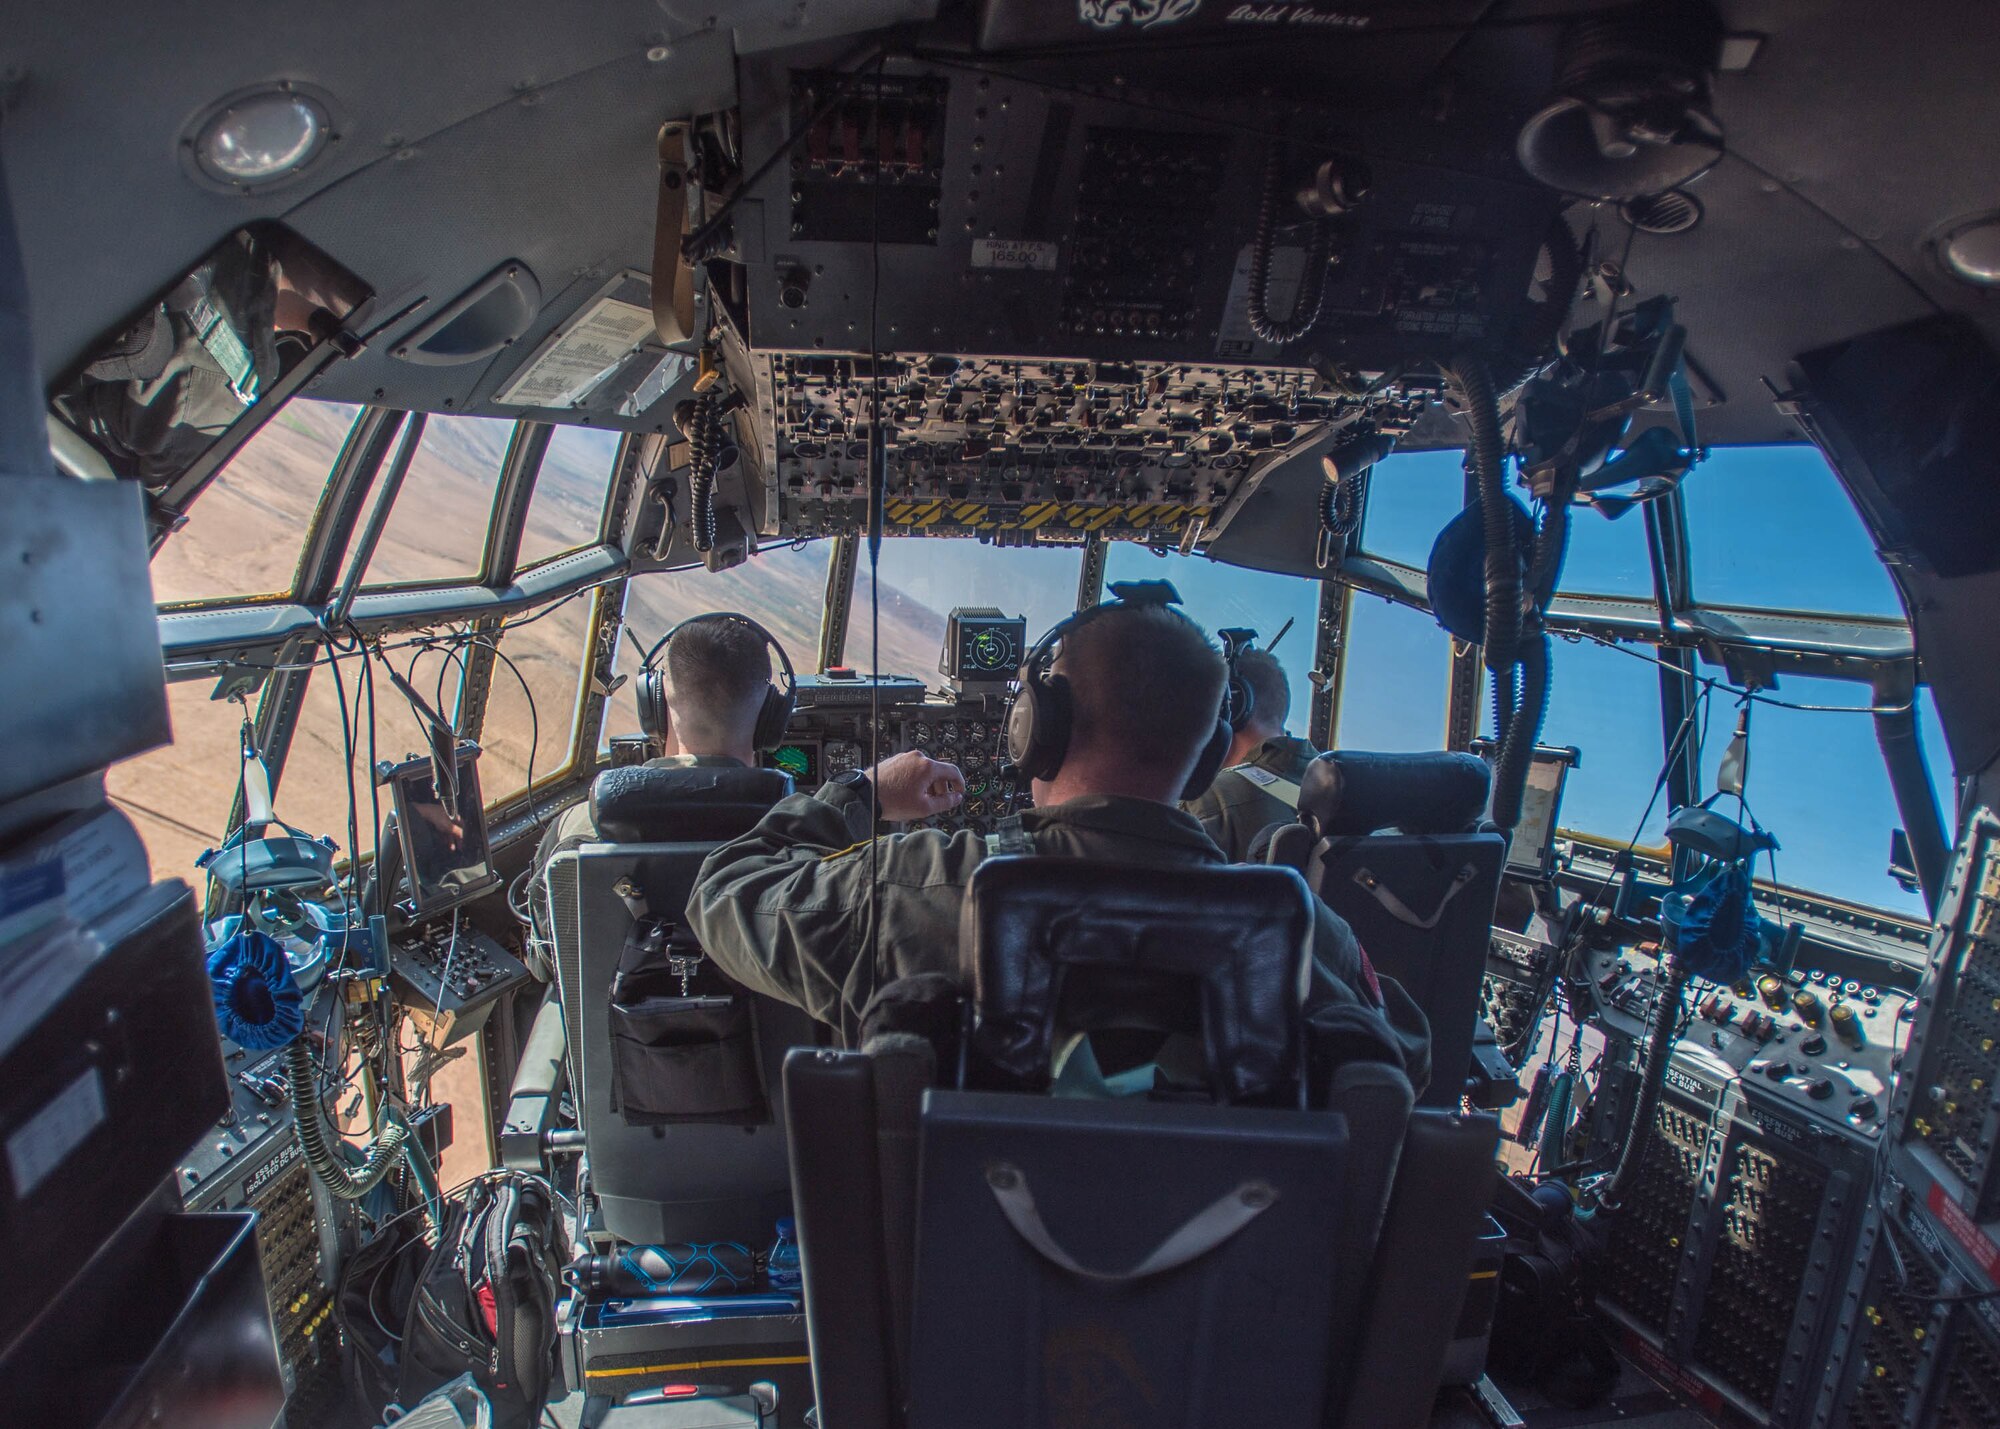 Aircrew members from the Kentucky Air National Guard’s 165th Airlift Squadron turn to final approach before landing a 123rd Airlift Wing C-130 Hercules into Guelmim, Morocco, on April 27, 2017, during Exercise African Lion. Multiple units from the U.S. Marine Corps, U.S. Army, U.S. Navy, U.S. Air Force and the Kentucky and Utah Air National Guards conducted multilateral and stability operations training with units from the Royal Moroccan Armed Forces in the Kingdom of Morocco during the exercise, which ran from April 19 to 28. The annual combined multilateral exercise is designed to improve interoperability and mutual understanding of each nation’s tactics, techniques and procedures while demonstrating the strong bond between the nations’ militaries. (U.S. Air Force photo by Master Sgt. Phil Speck)